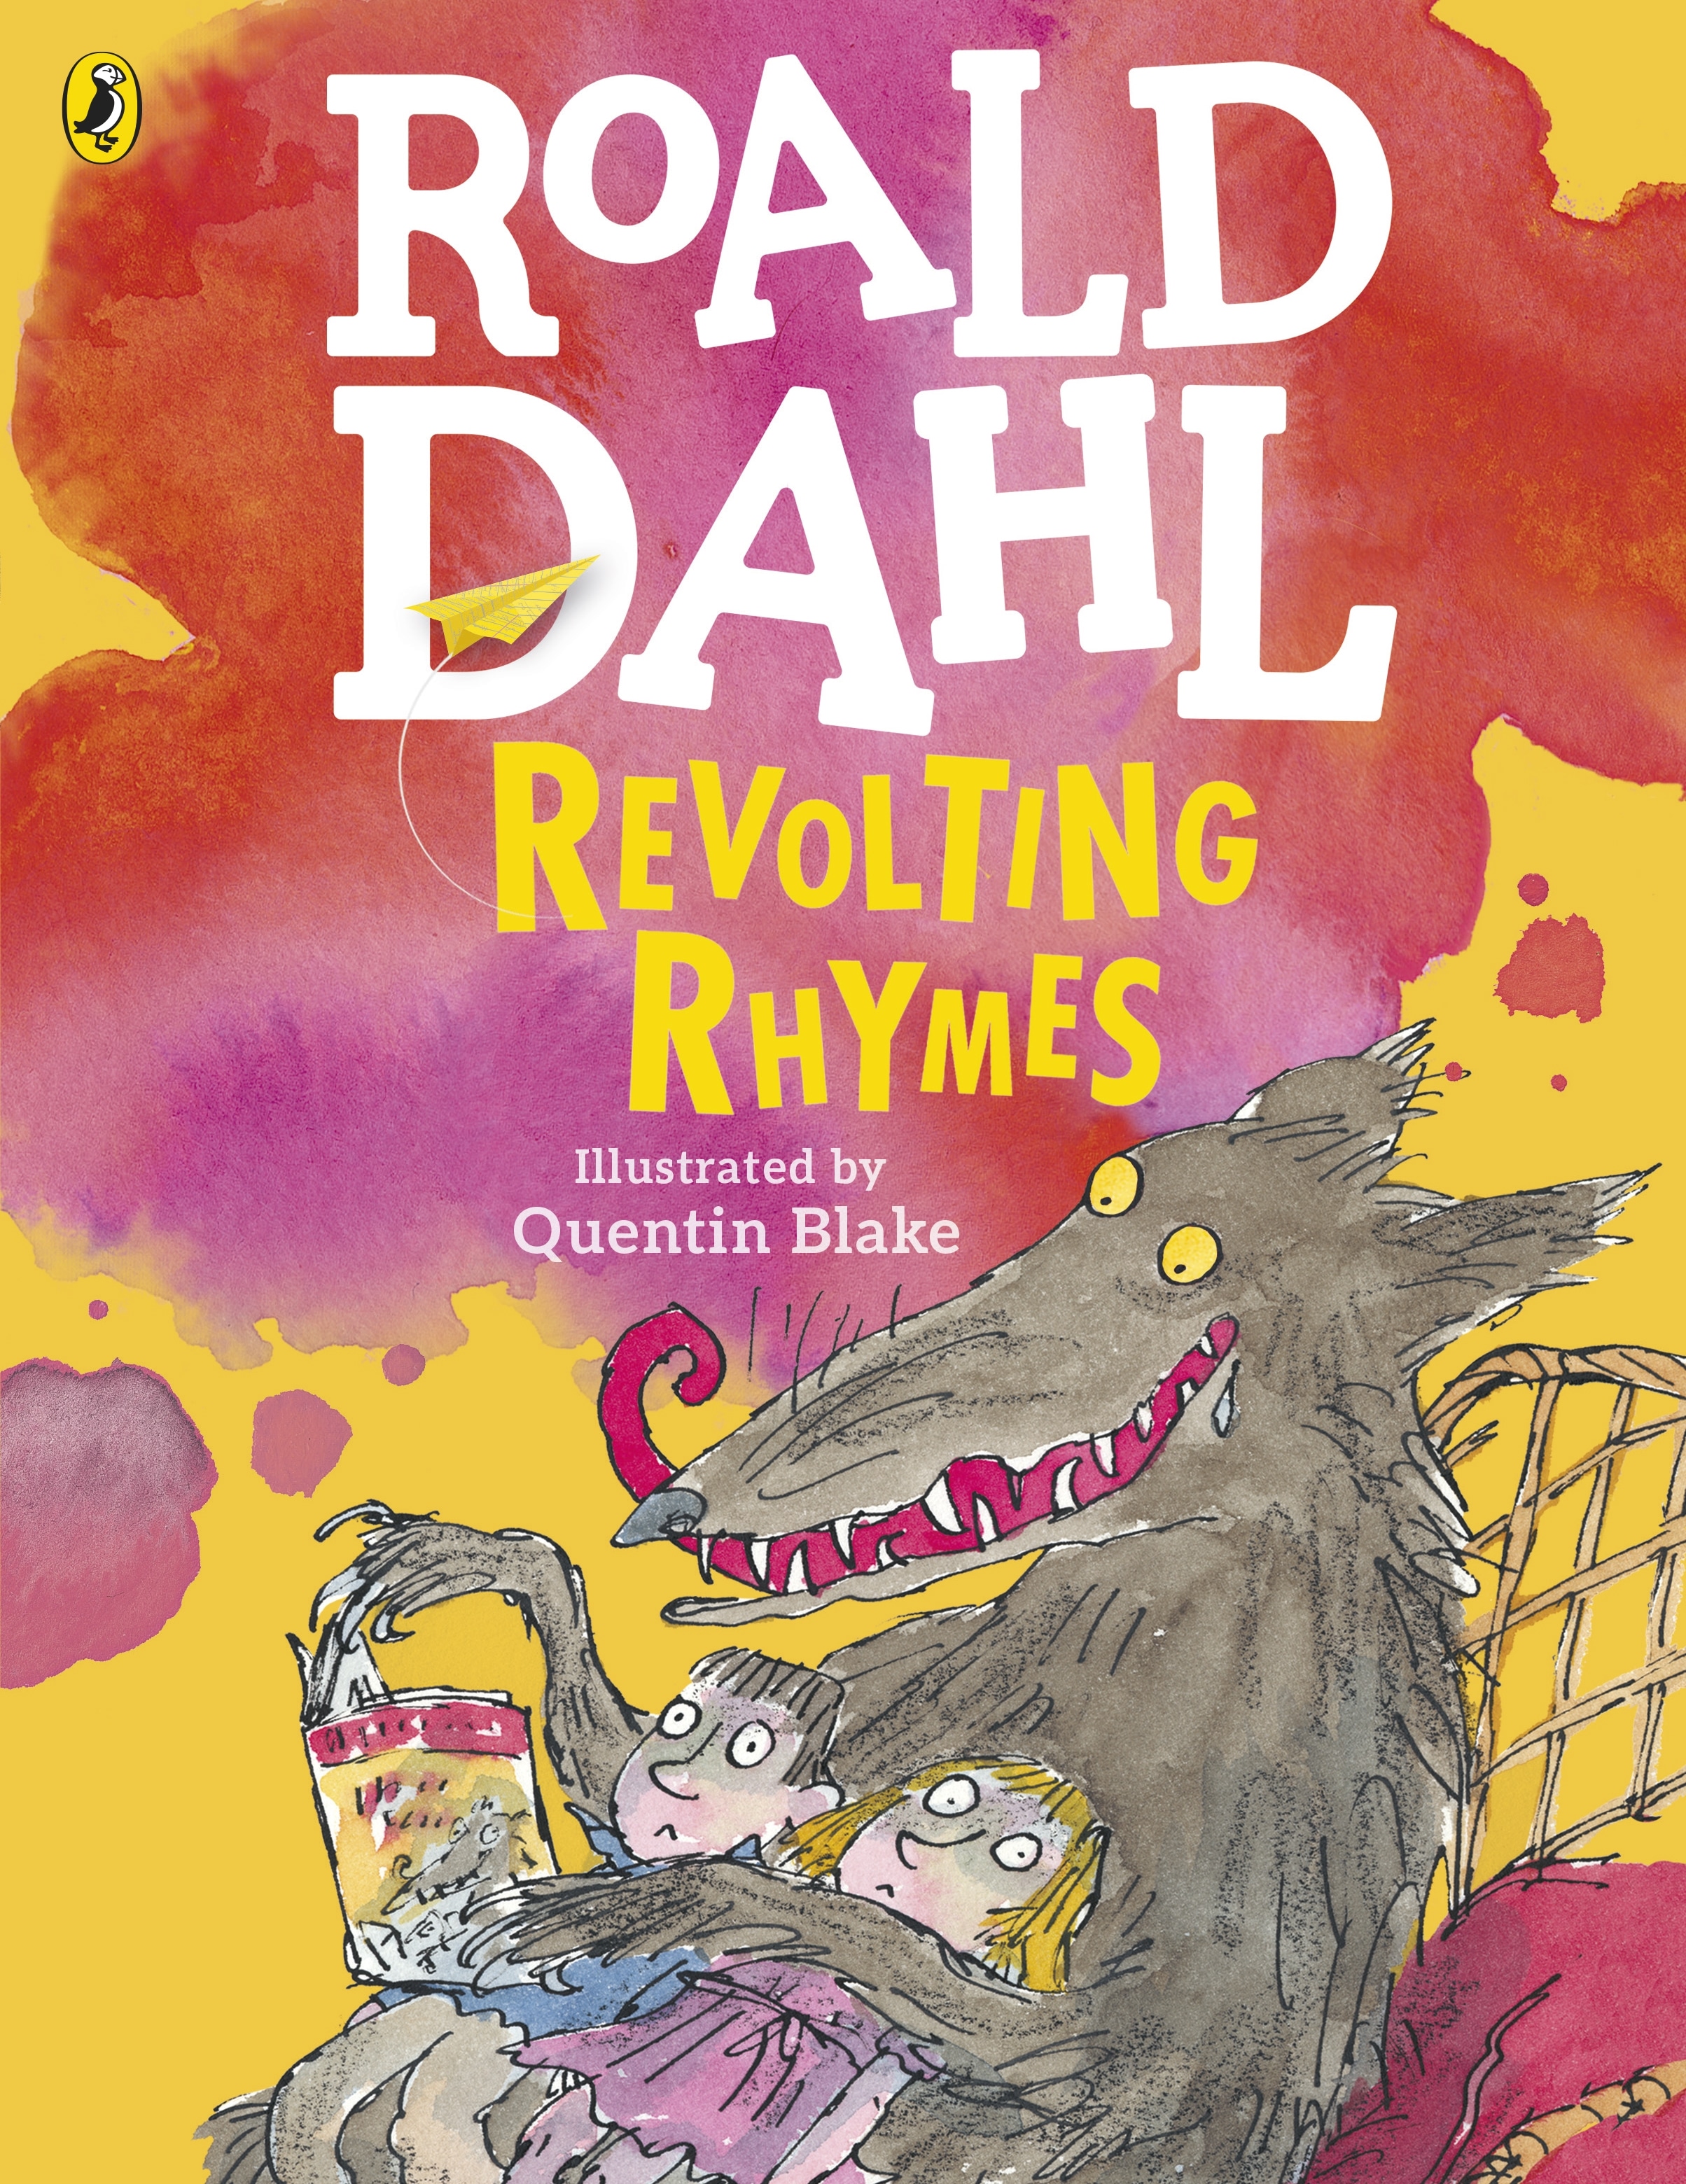 Book “Revolting Rhymes (Colour Edition)” by Roald Dahl — July 7, 2016